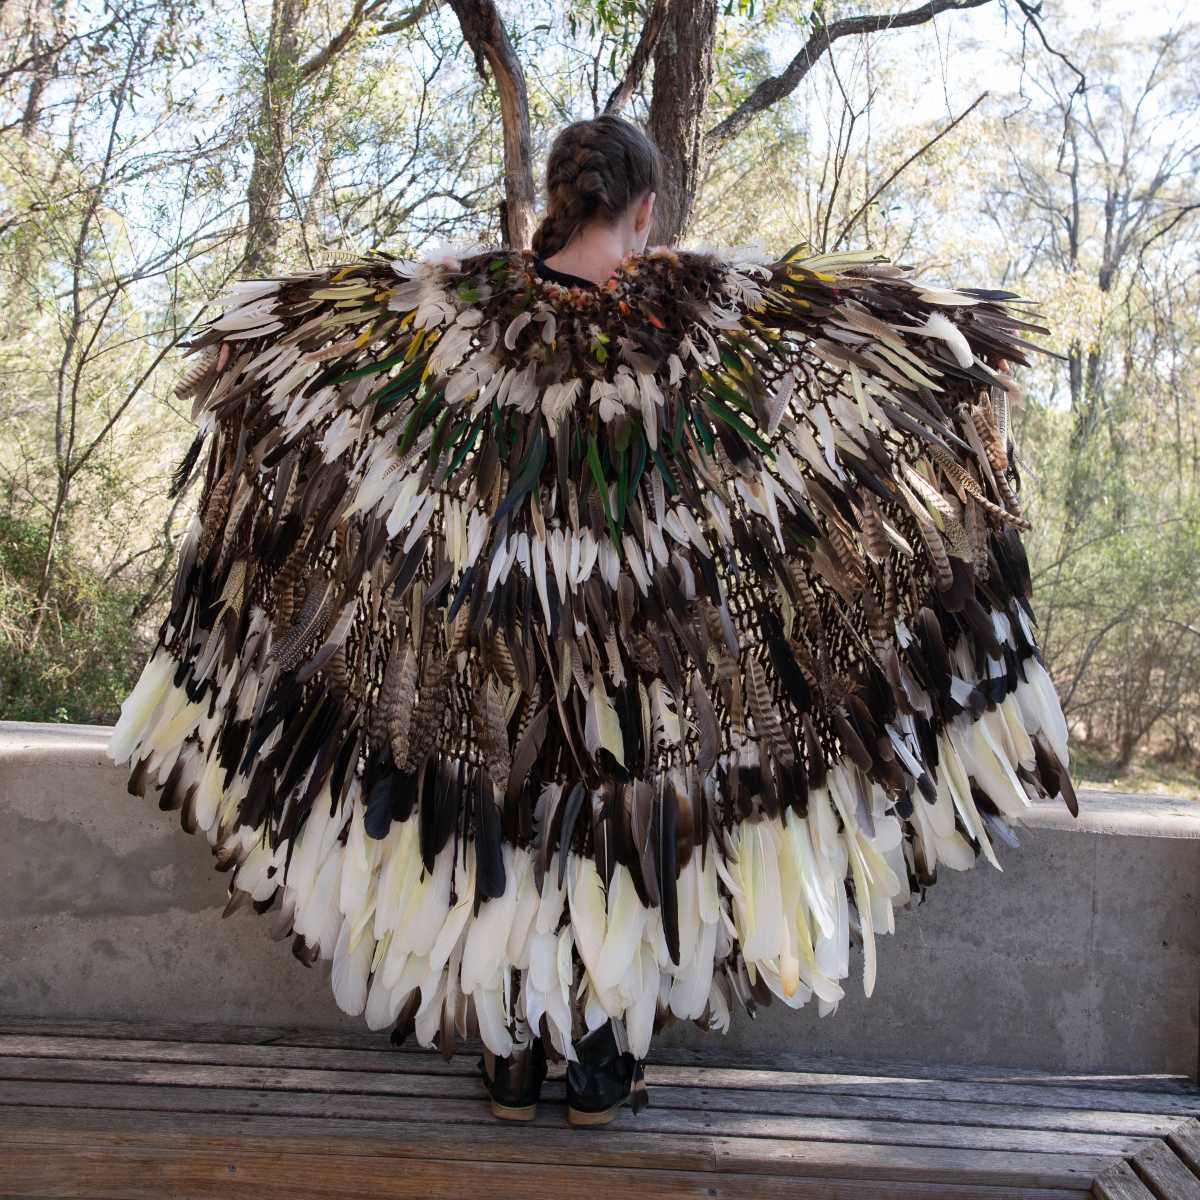 A young girl is wearing a feather cloak and stands with her arms outstreched and her back to the camera